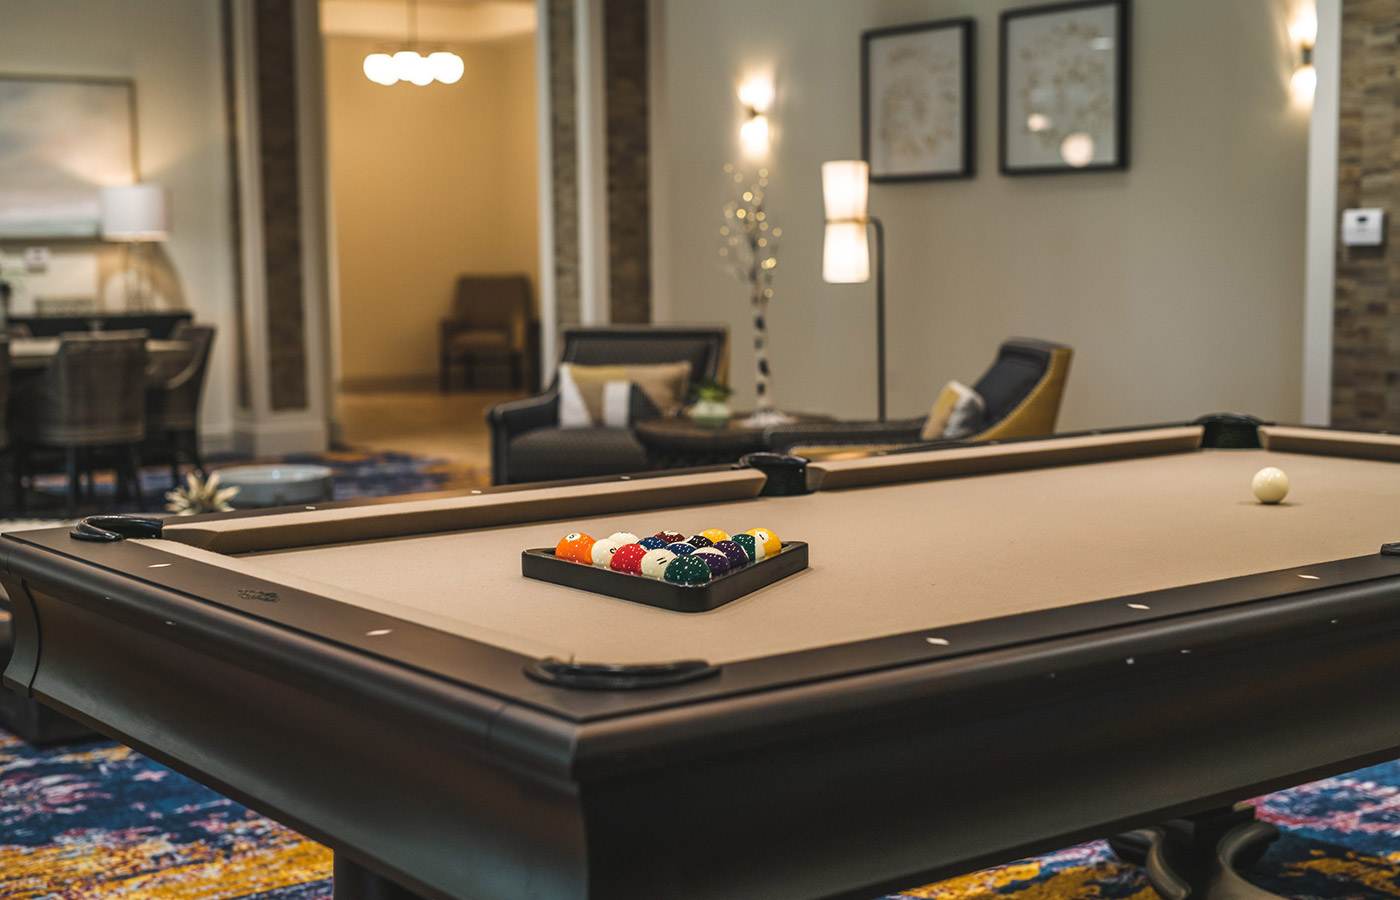 Furnished room with pool table.